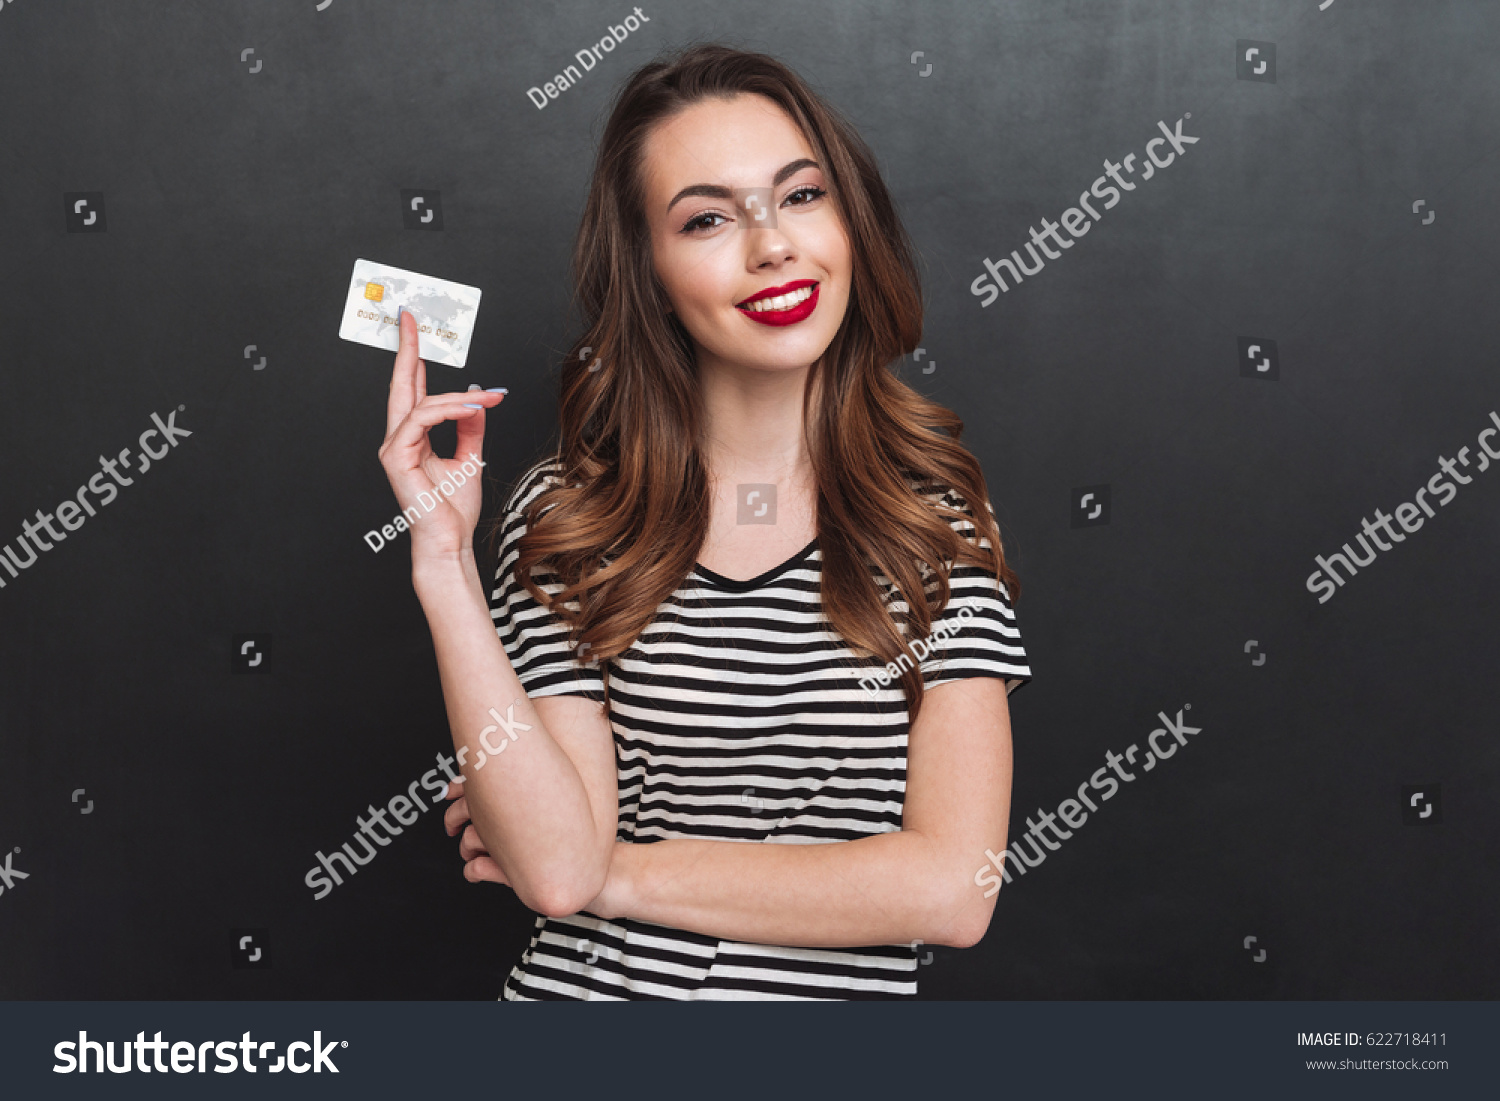 Image of smiling young lady standing over grey wall and holding debit card in hands. Looking at camera. #622718411